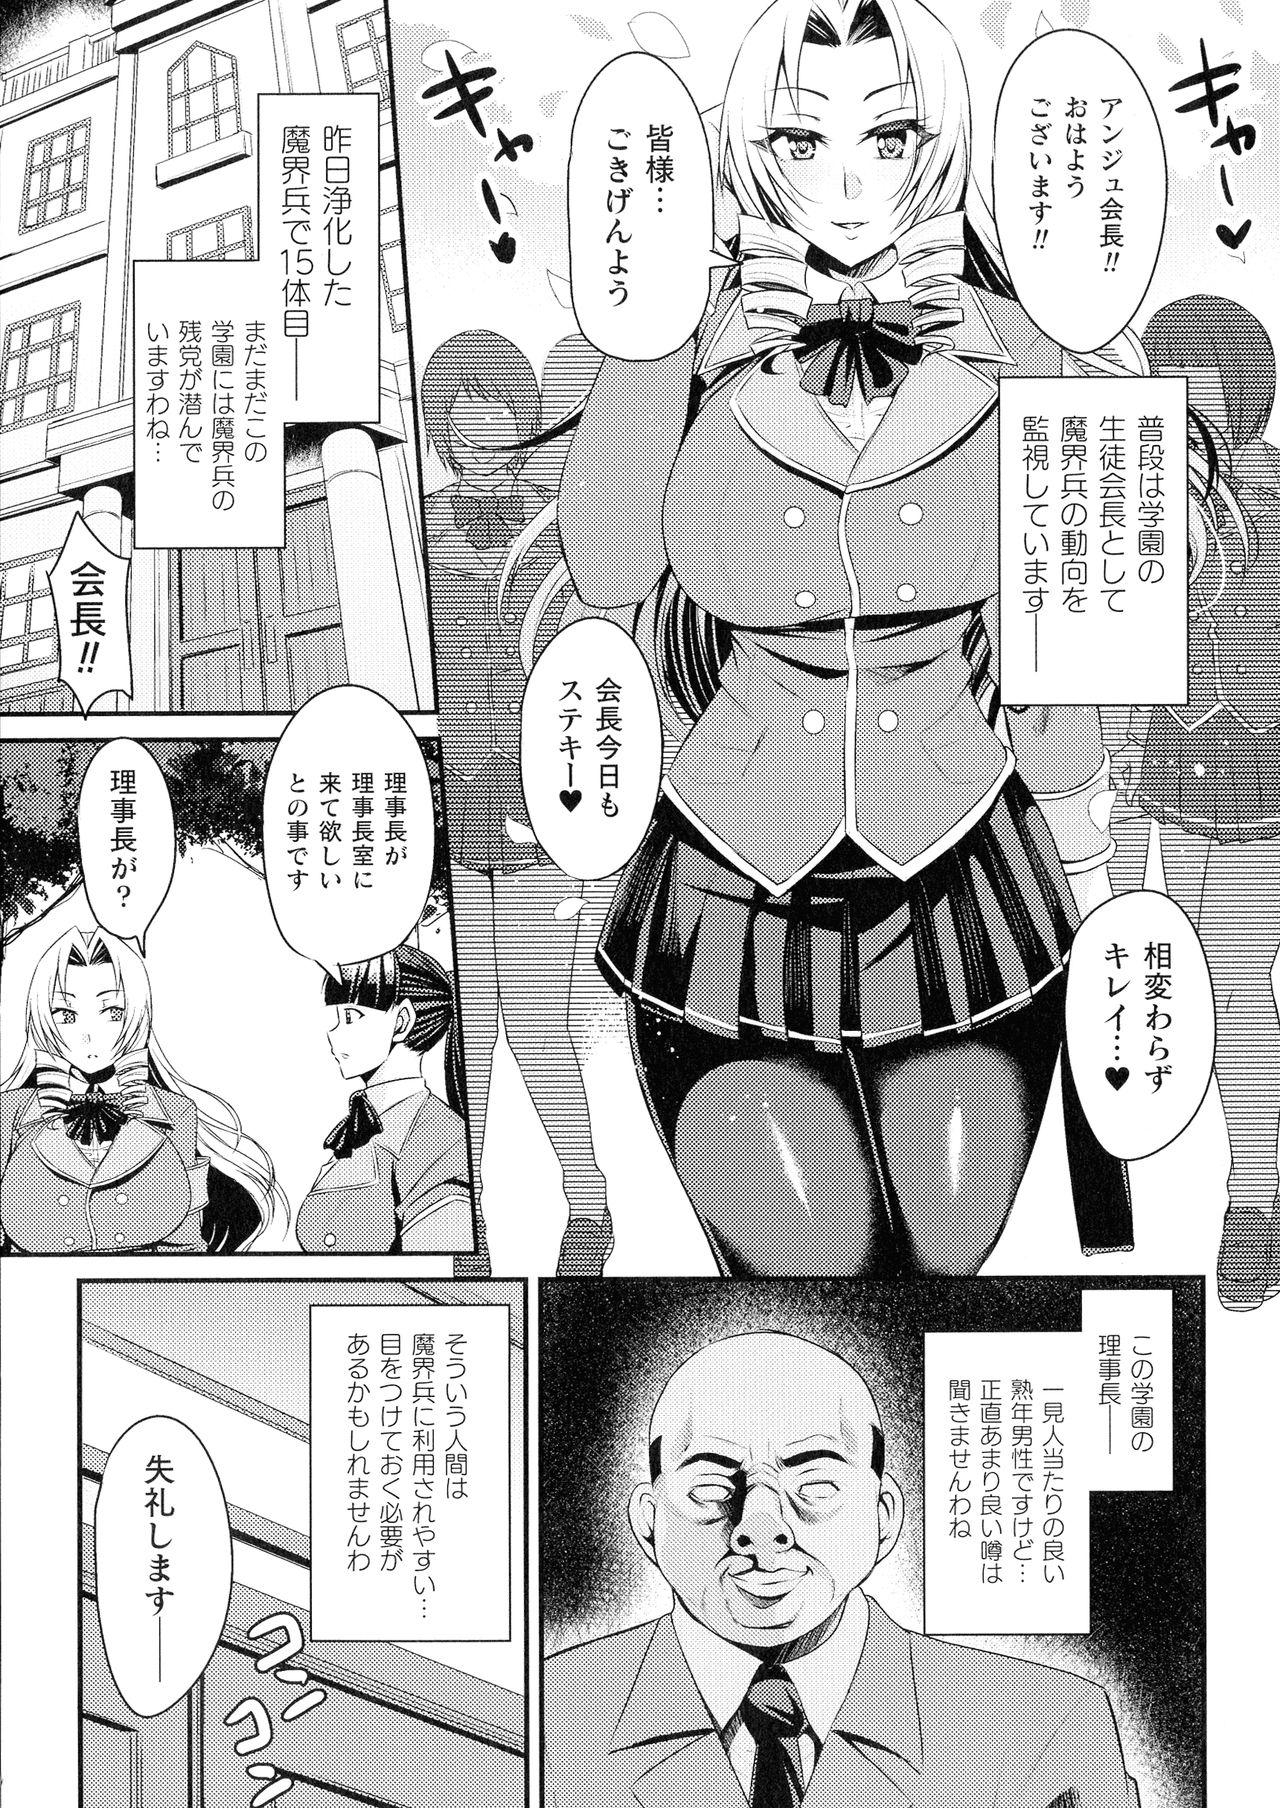 Prostitute Kukkoro-ism Outdoors - Page 7